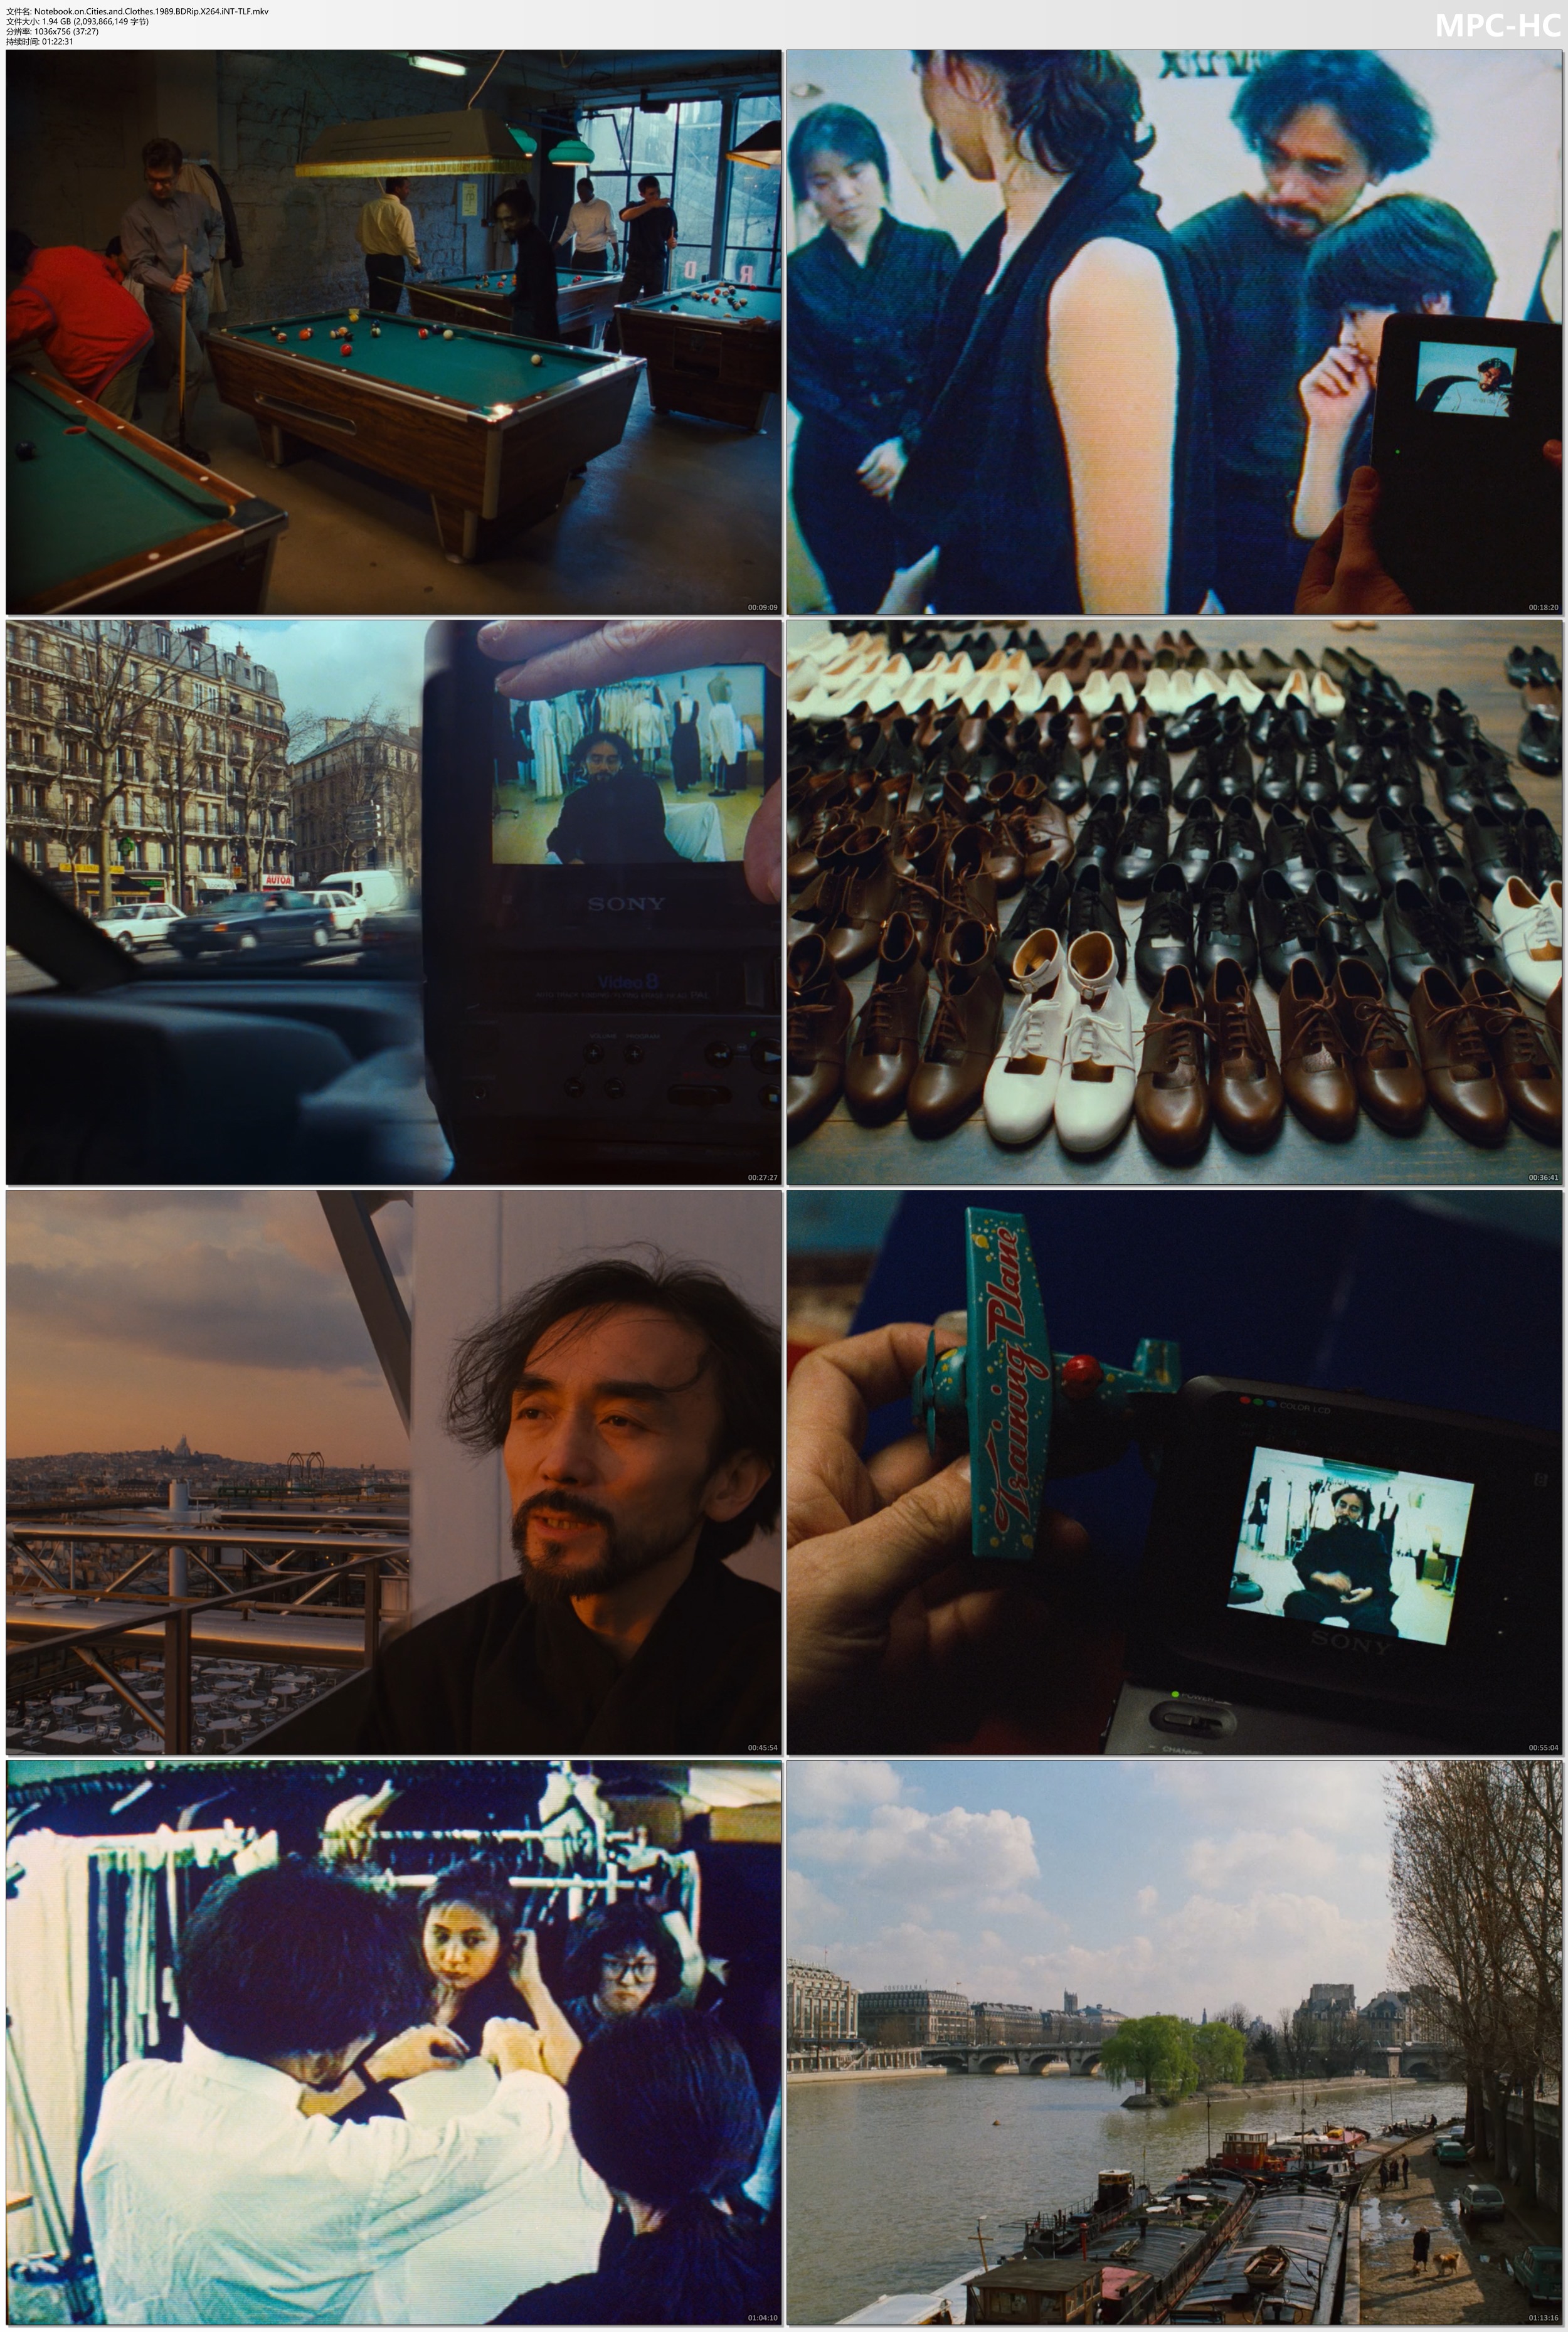 Notebook_on_Cities_and_Clothes_1989_BDRip_X264_iNT-TLF_mkv_thumbs.jpg